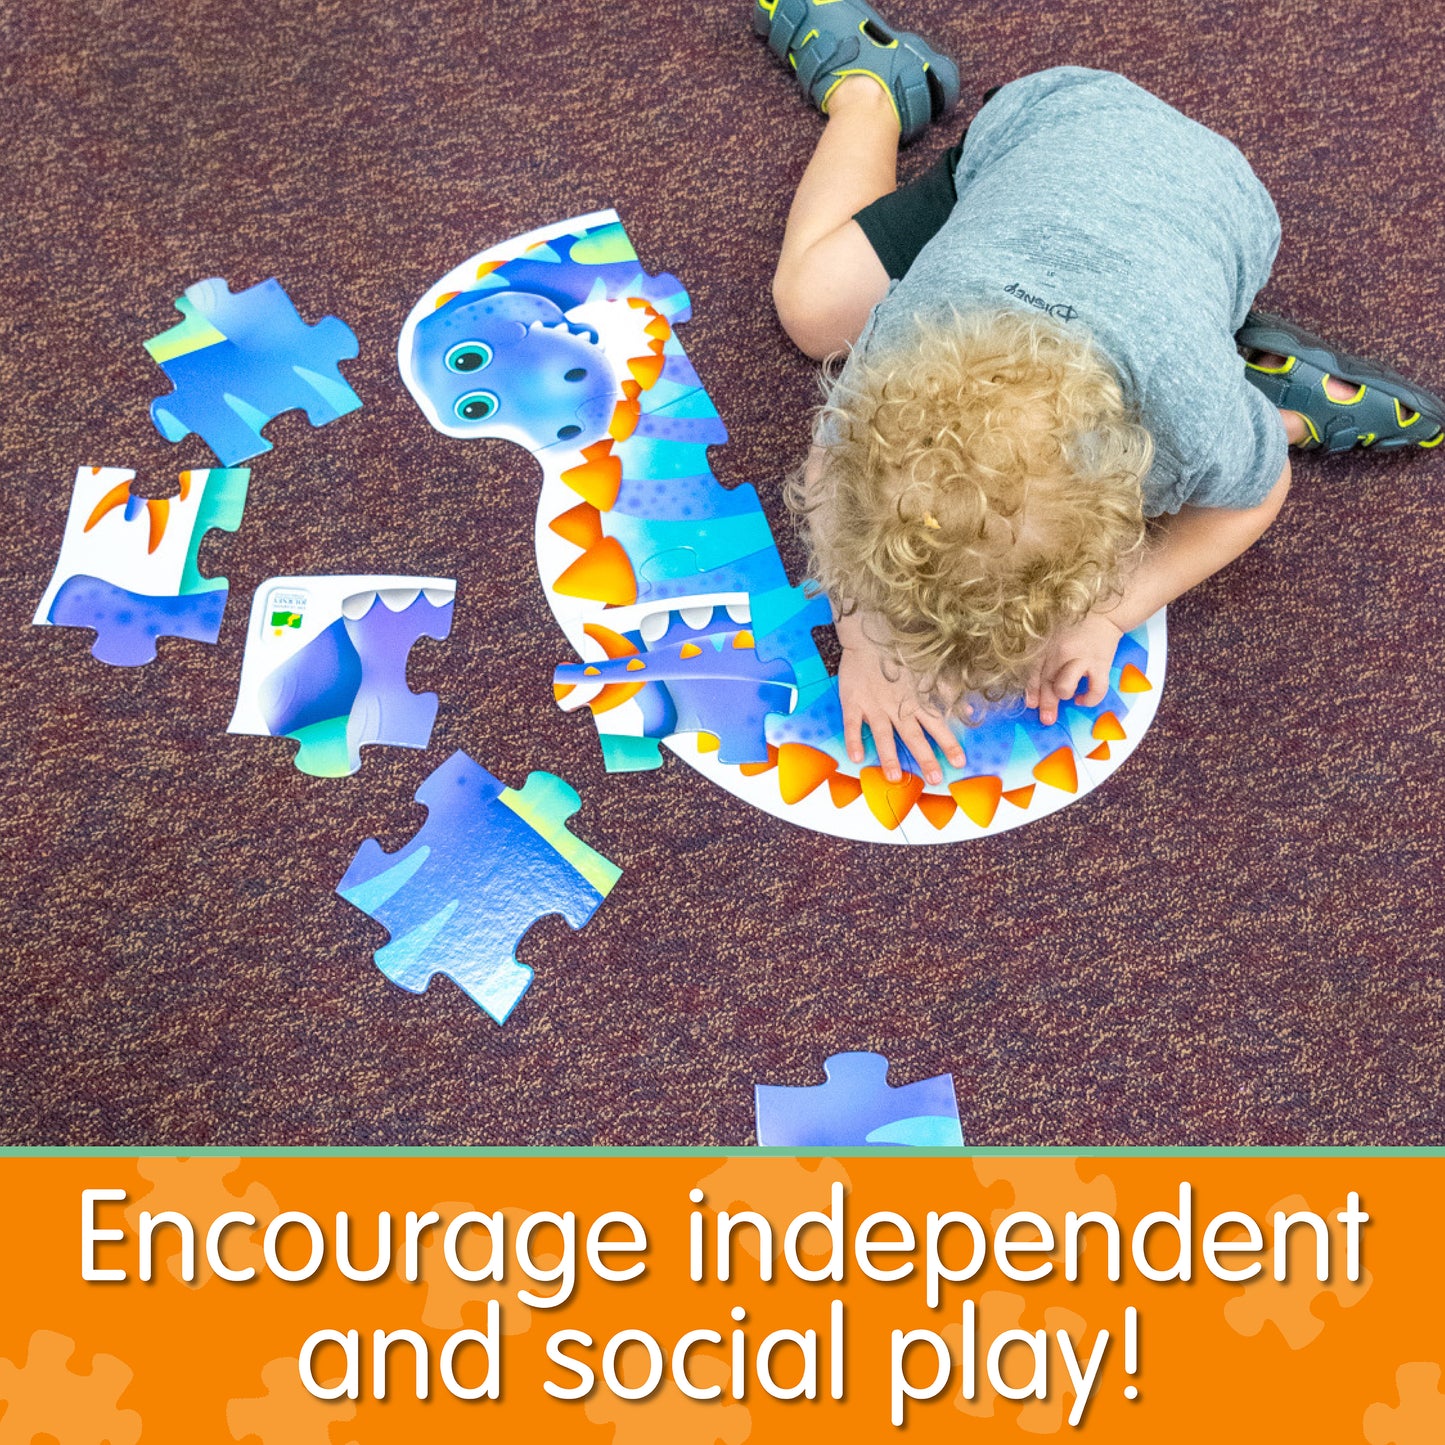 Infographic with little boy assembling My First Big Puzzle - Dinosaur that says, "Encourage independent and social play!"